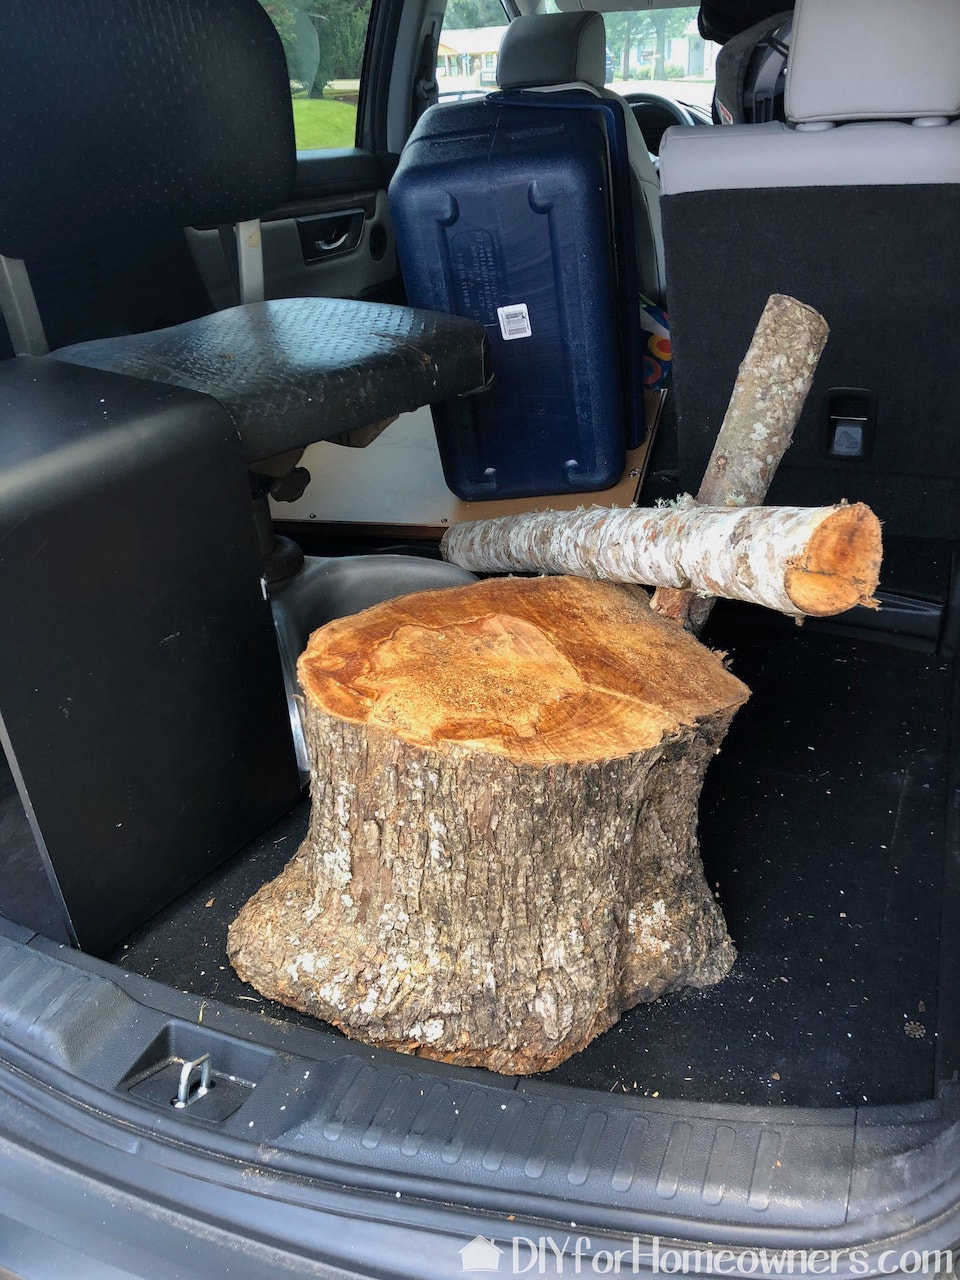 We found this stump curbside from a tip from our UPS driver.